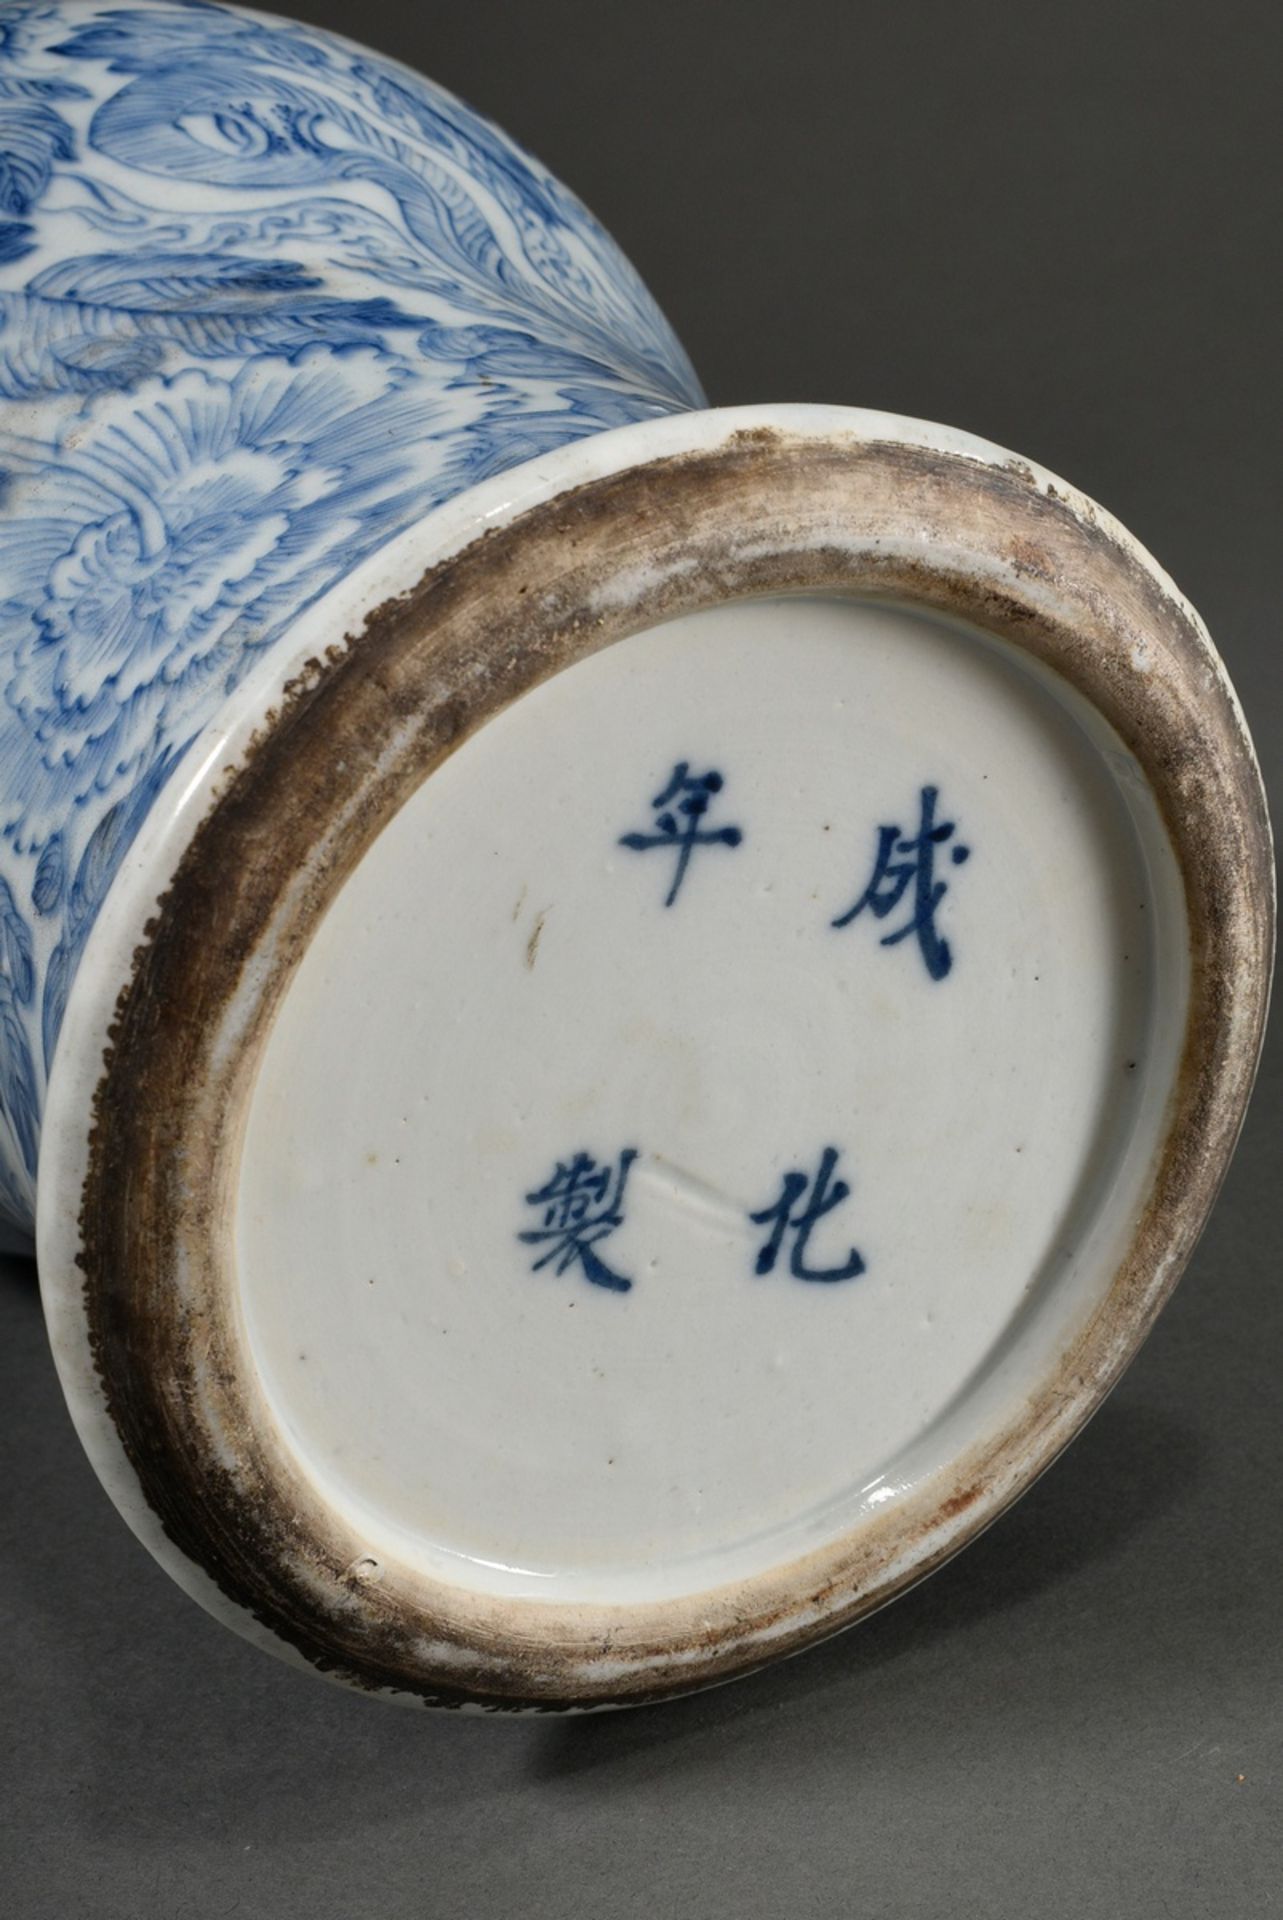 Chinese Gu porcelain vase with pale floral blue-and-white painting decoration "dragon and phoenix b - Image 4 of 5